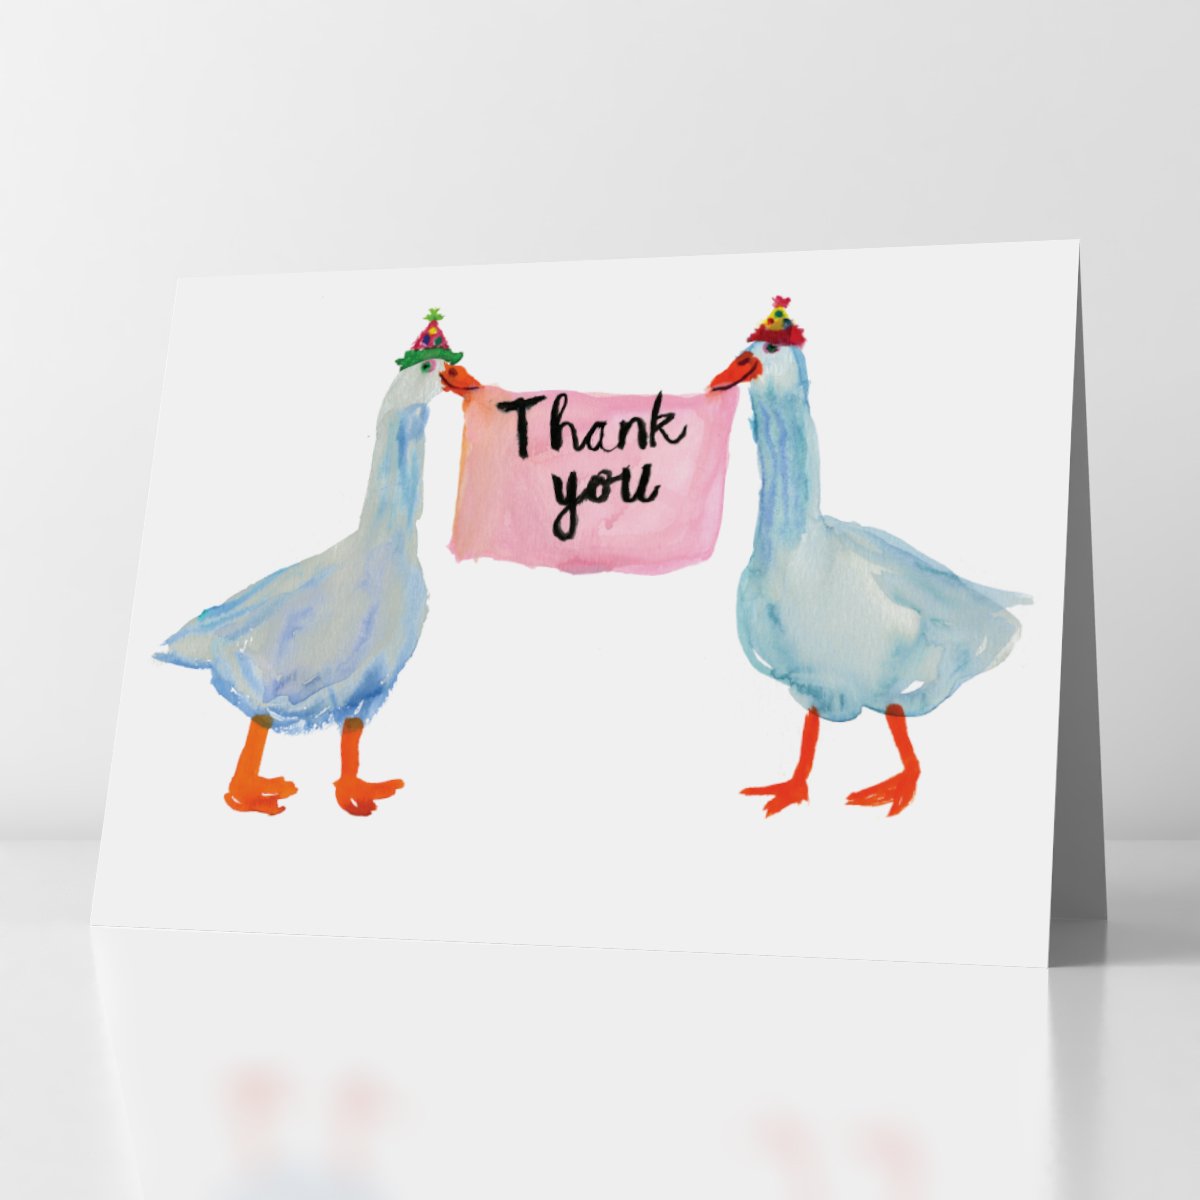 two geese holding thank you sign in their mouths 